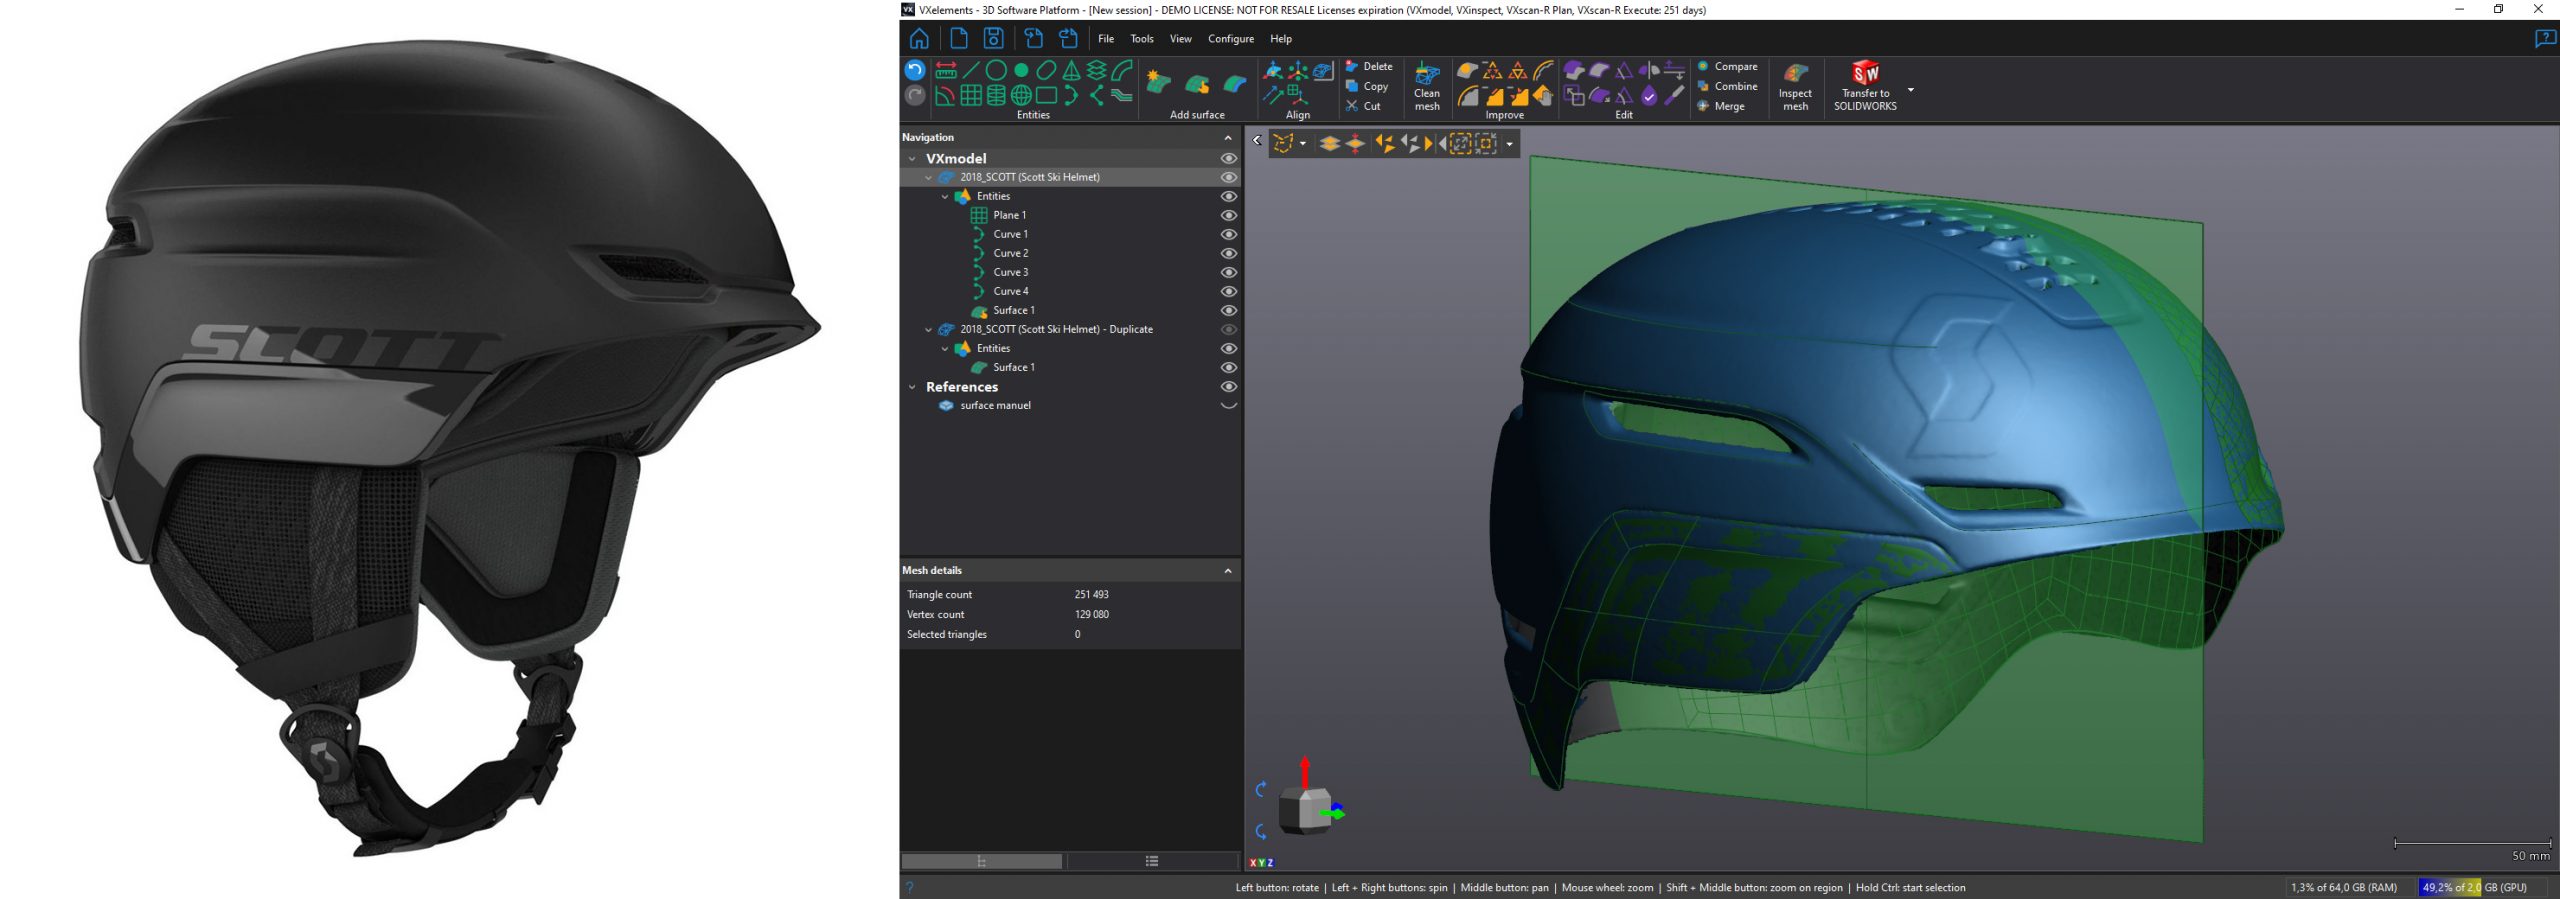 Comparison of a real ski helmet and a 3D model helmet in VXelements Software